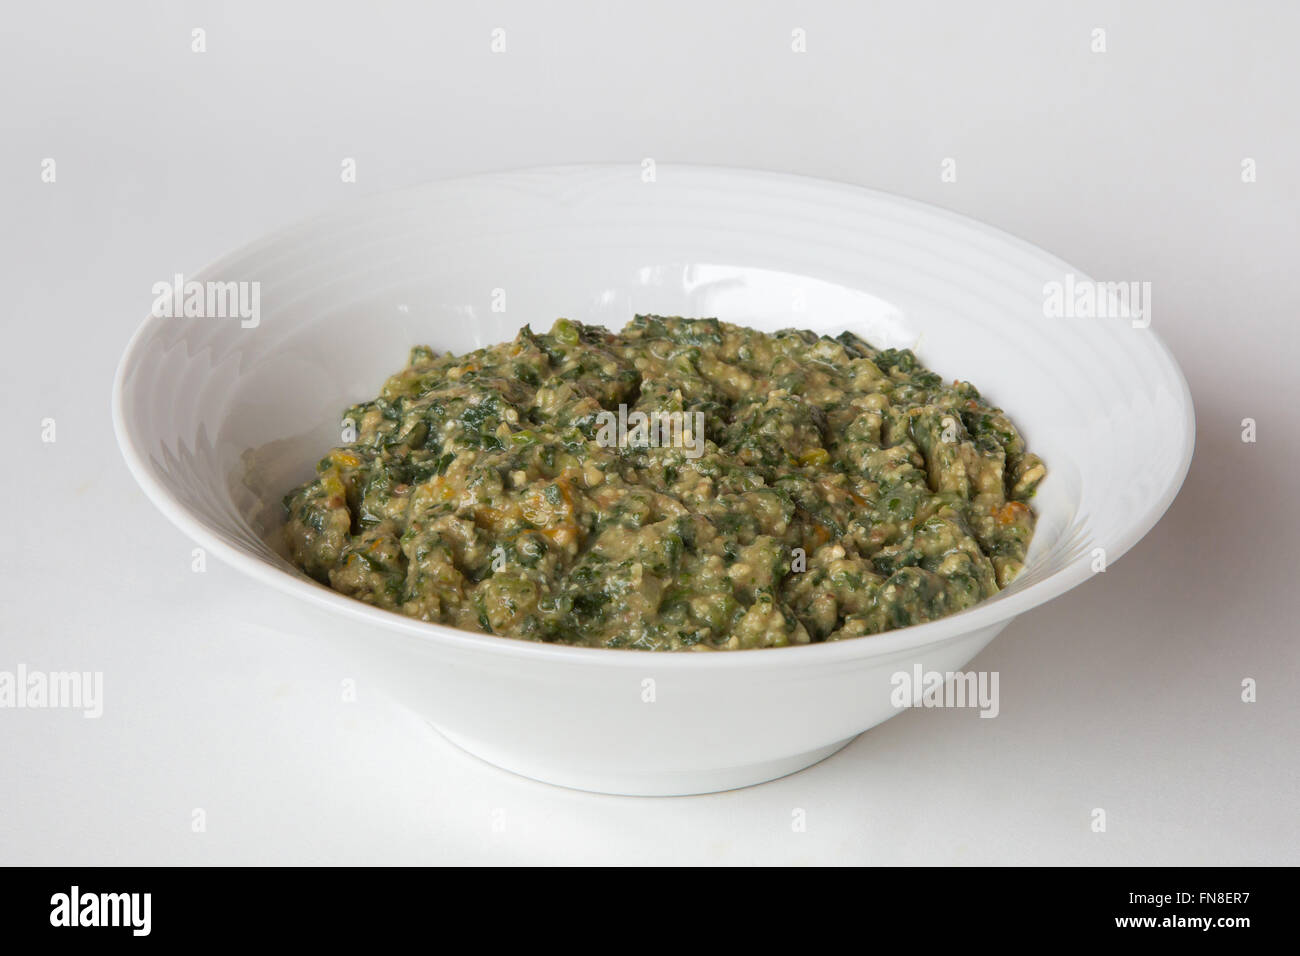 A bowl umbhidvo wetintsanga consisting of cooked  pumpkin leaves, shoots and ground nuts - a traditional Swazi dish Stock Photo